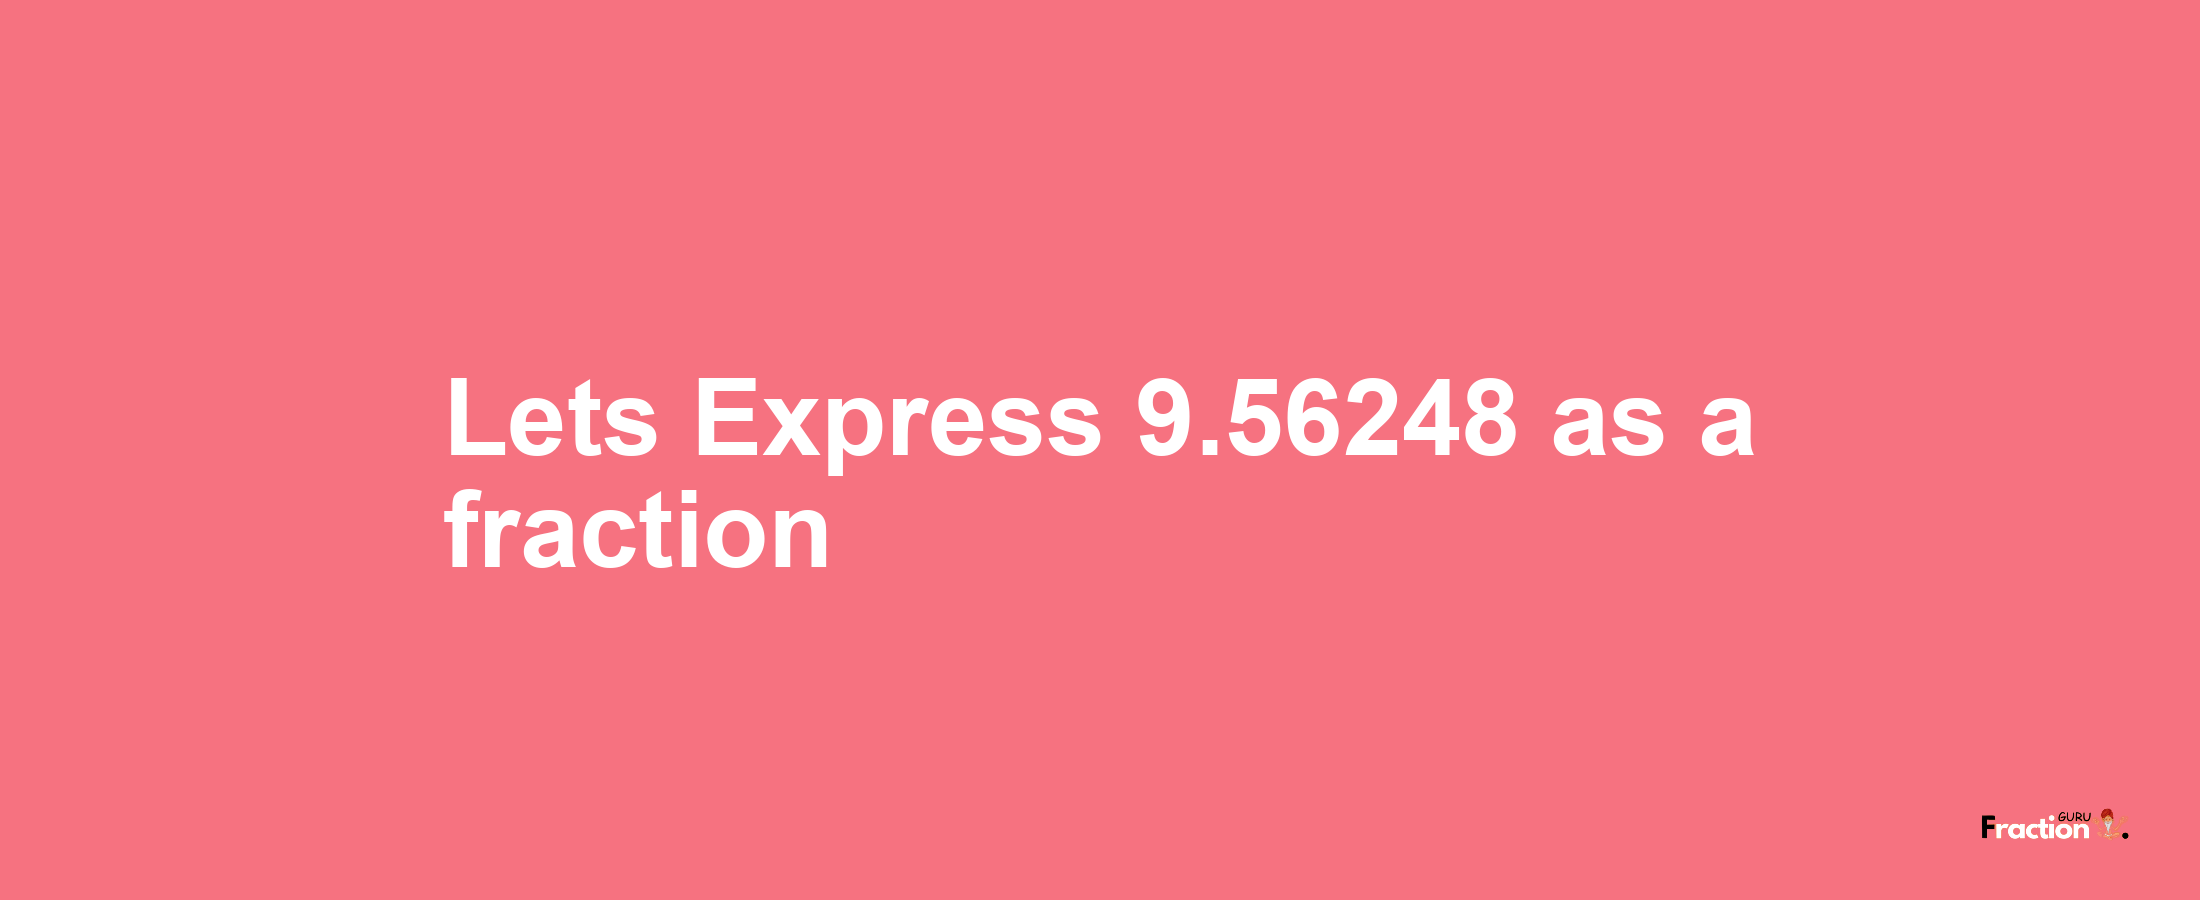 Lets Express 9.56248 as afraction